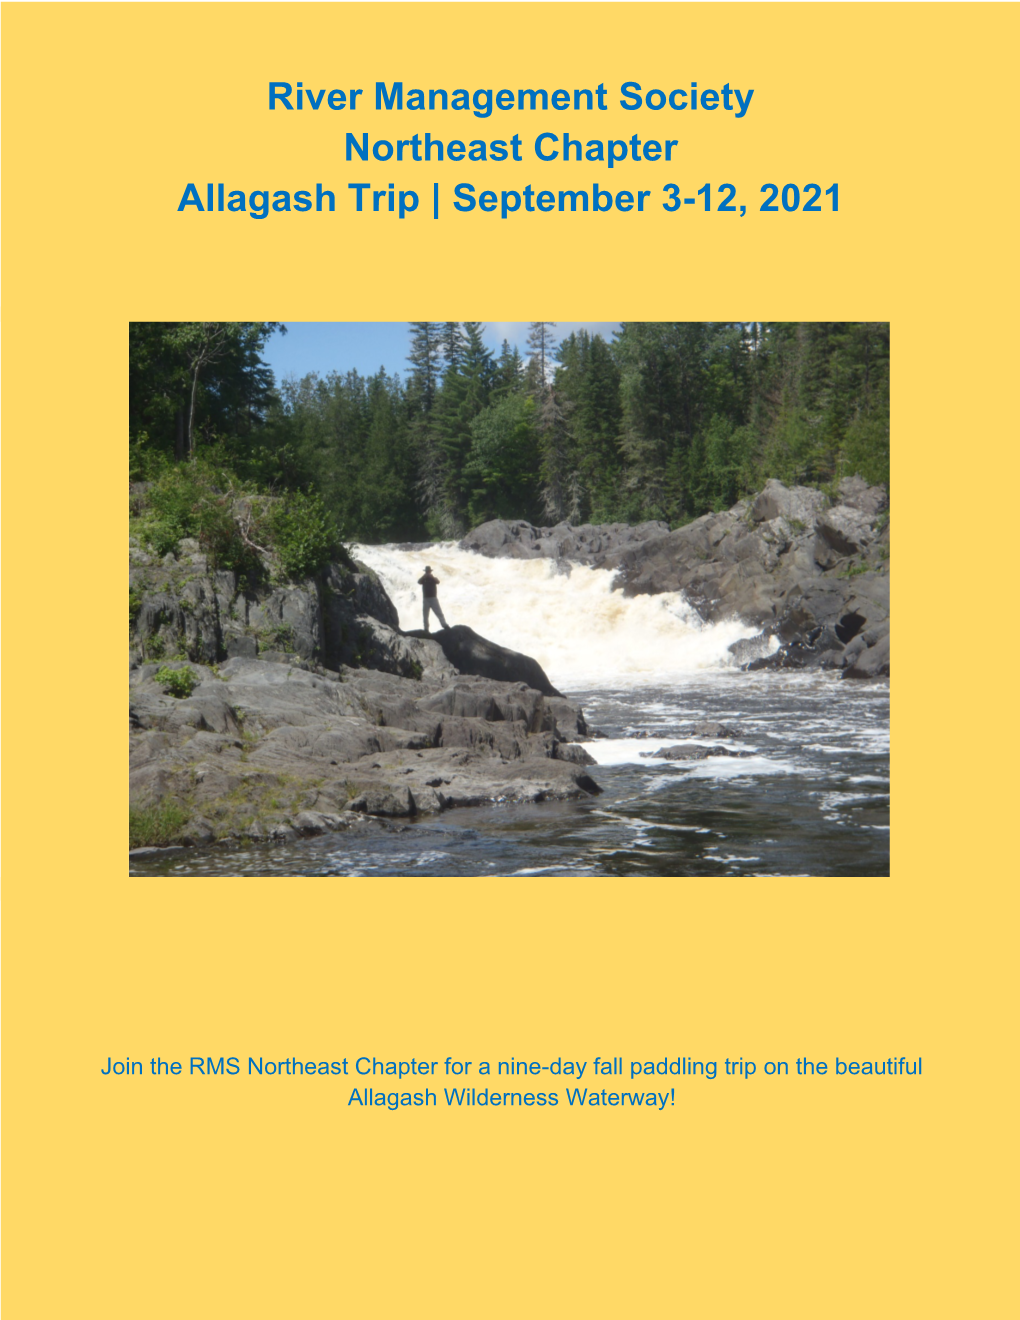 River Management Society Northeast Chapter Allagash Trip | September 3-12, 2021